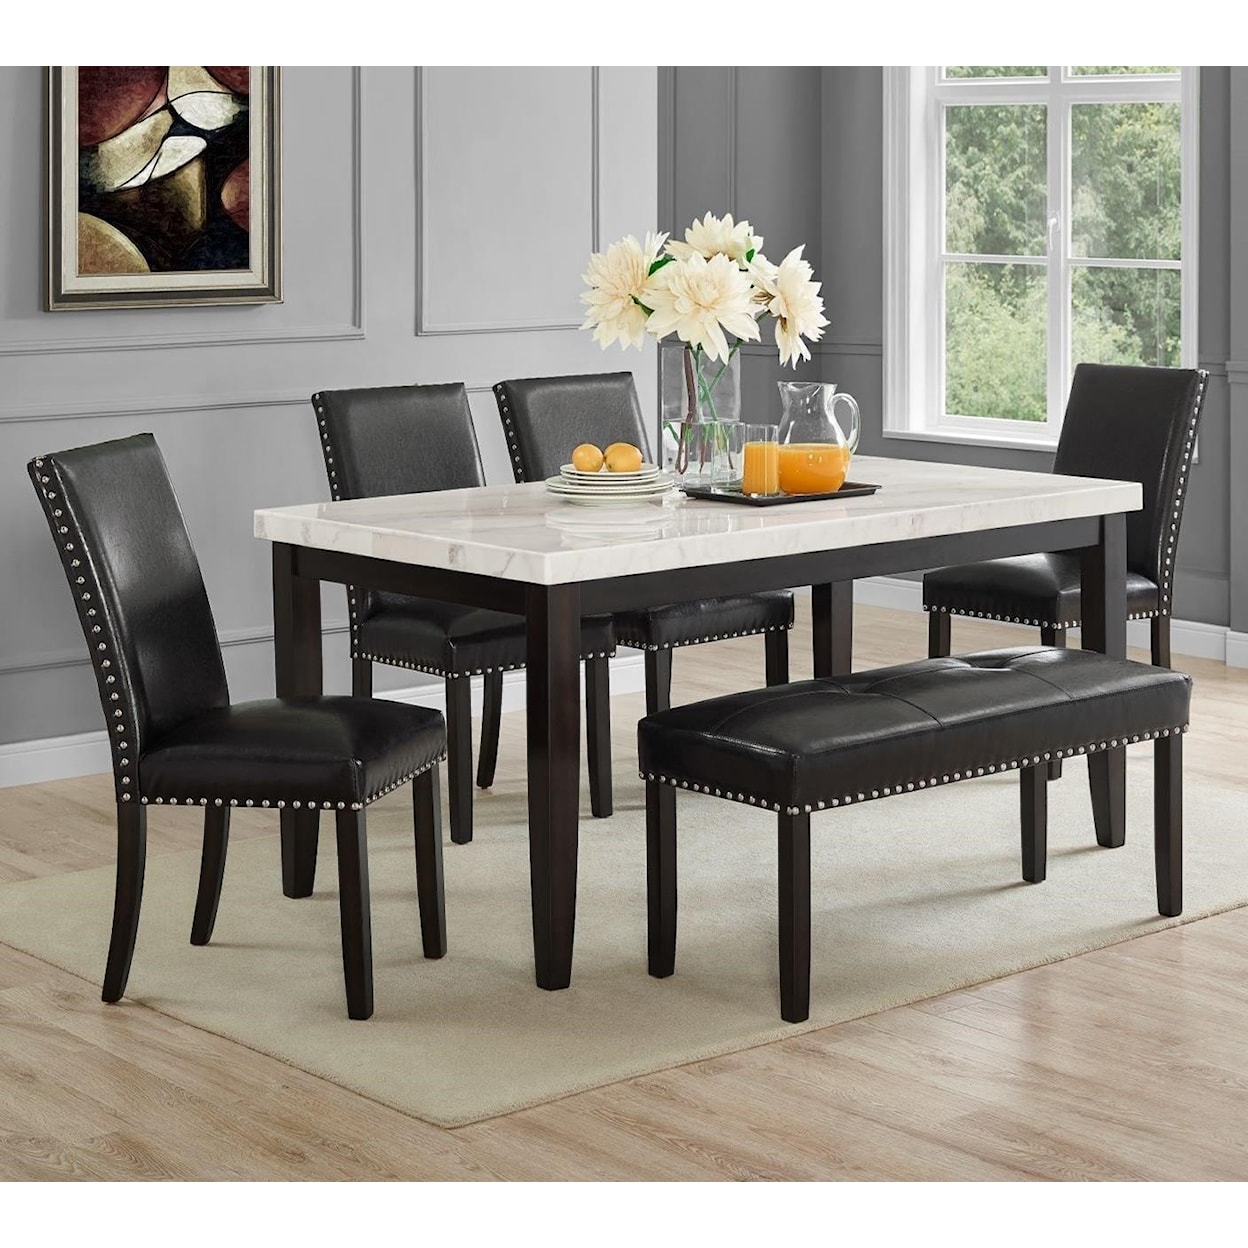 Steve Silver Westby WESTBY CARRERA 6 PC TABLE |